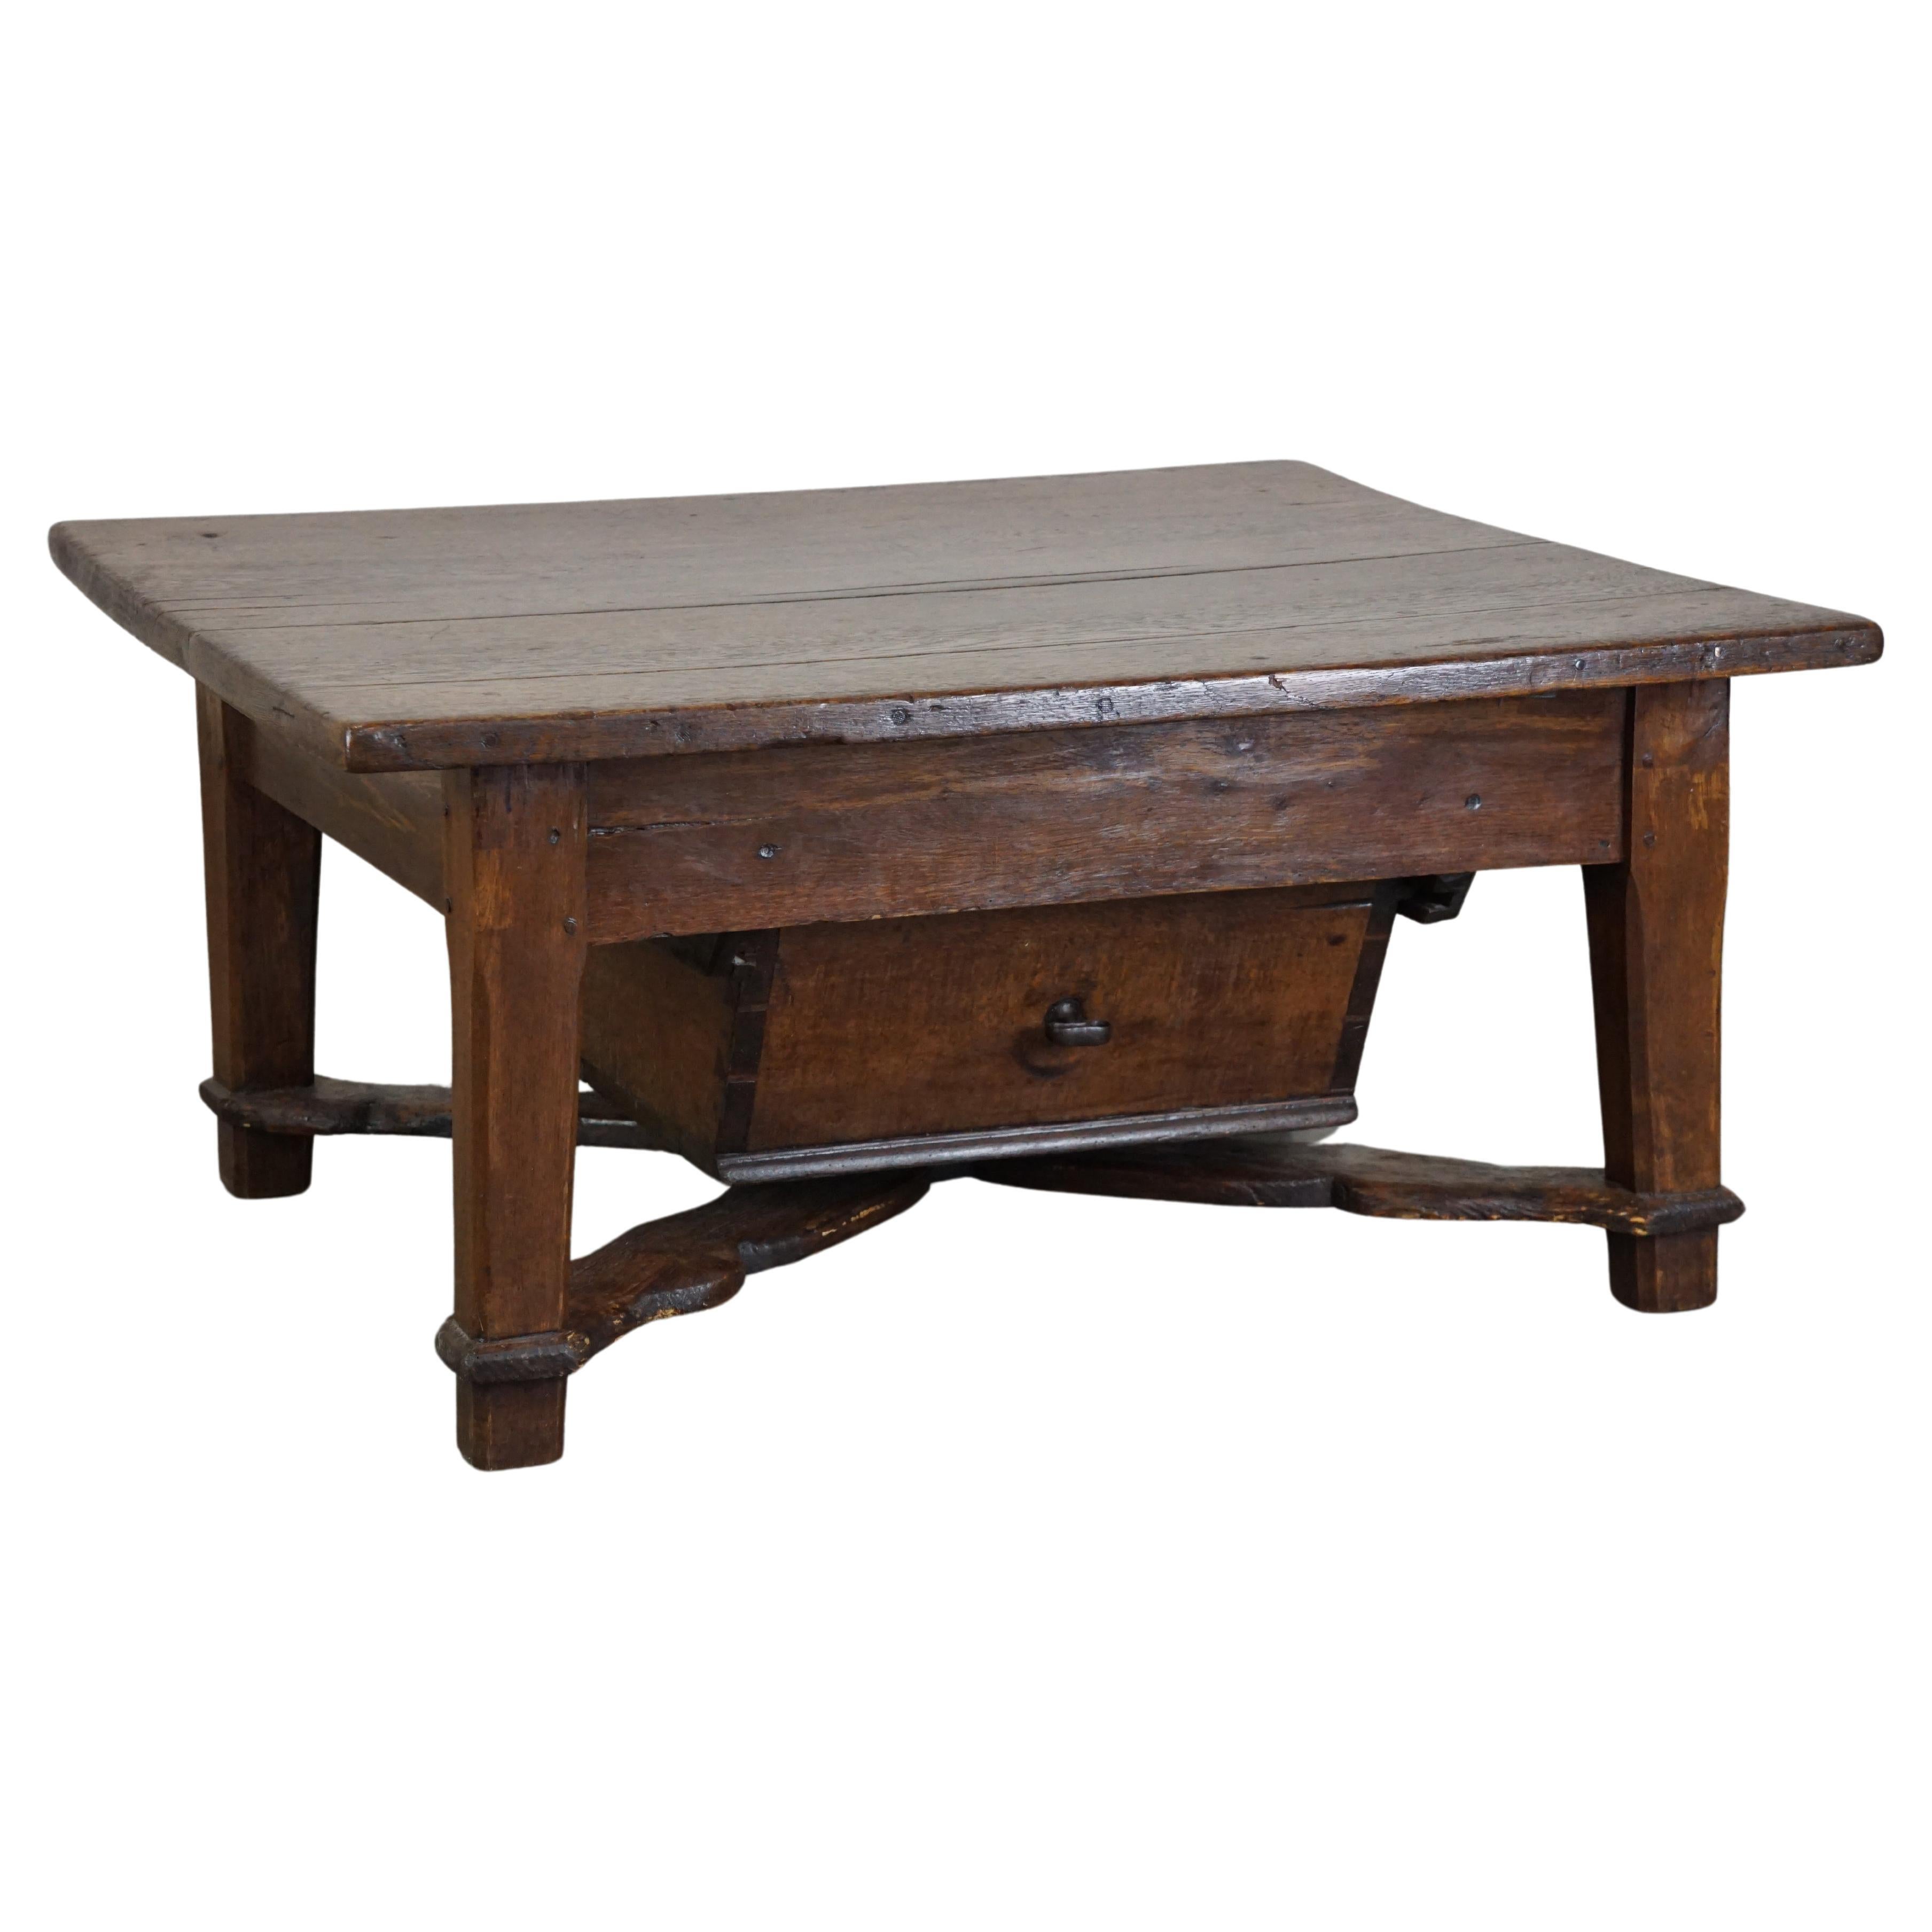 Late 18th-century Spanish coffee table with deep drawer and a beautiful patina For Sale